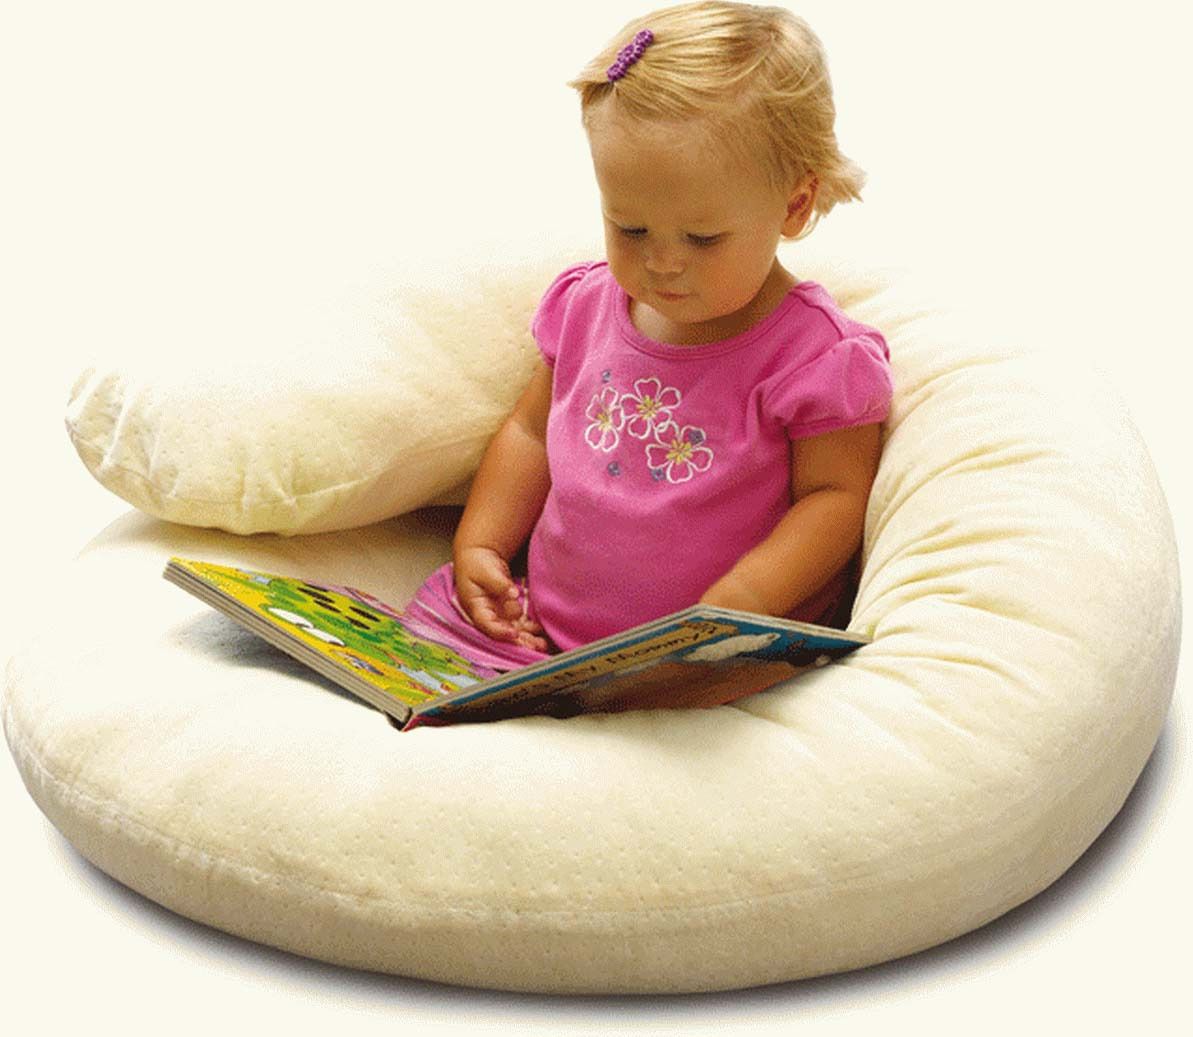      Born Free Comfort Fit Body Pillow, 47370, 